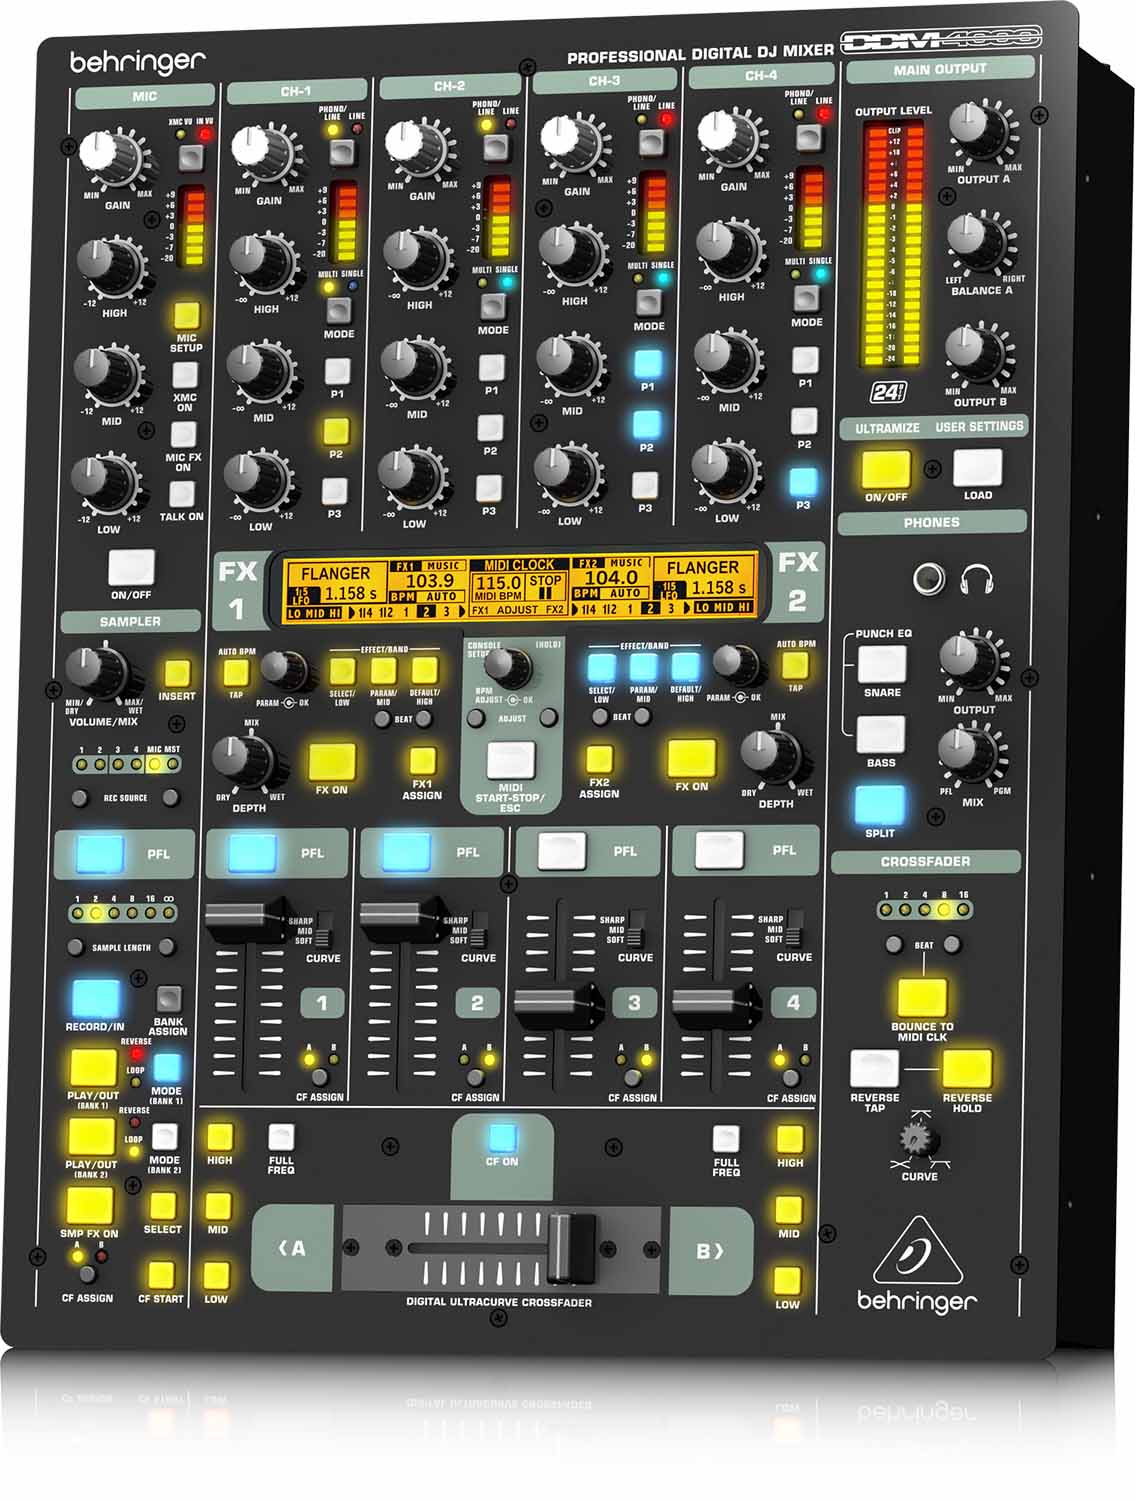 Behringer DDM4000, Ultimate 5-Channel Digital DJ Mixer With Sampler, 4 FX Sections, Dual BPM Counters And MIDI - Open Box - Hollywood DJ